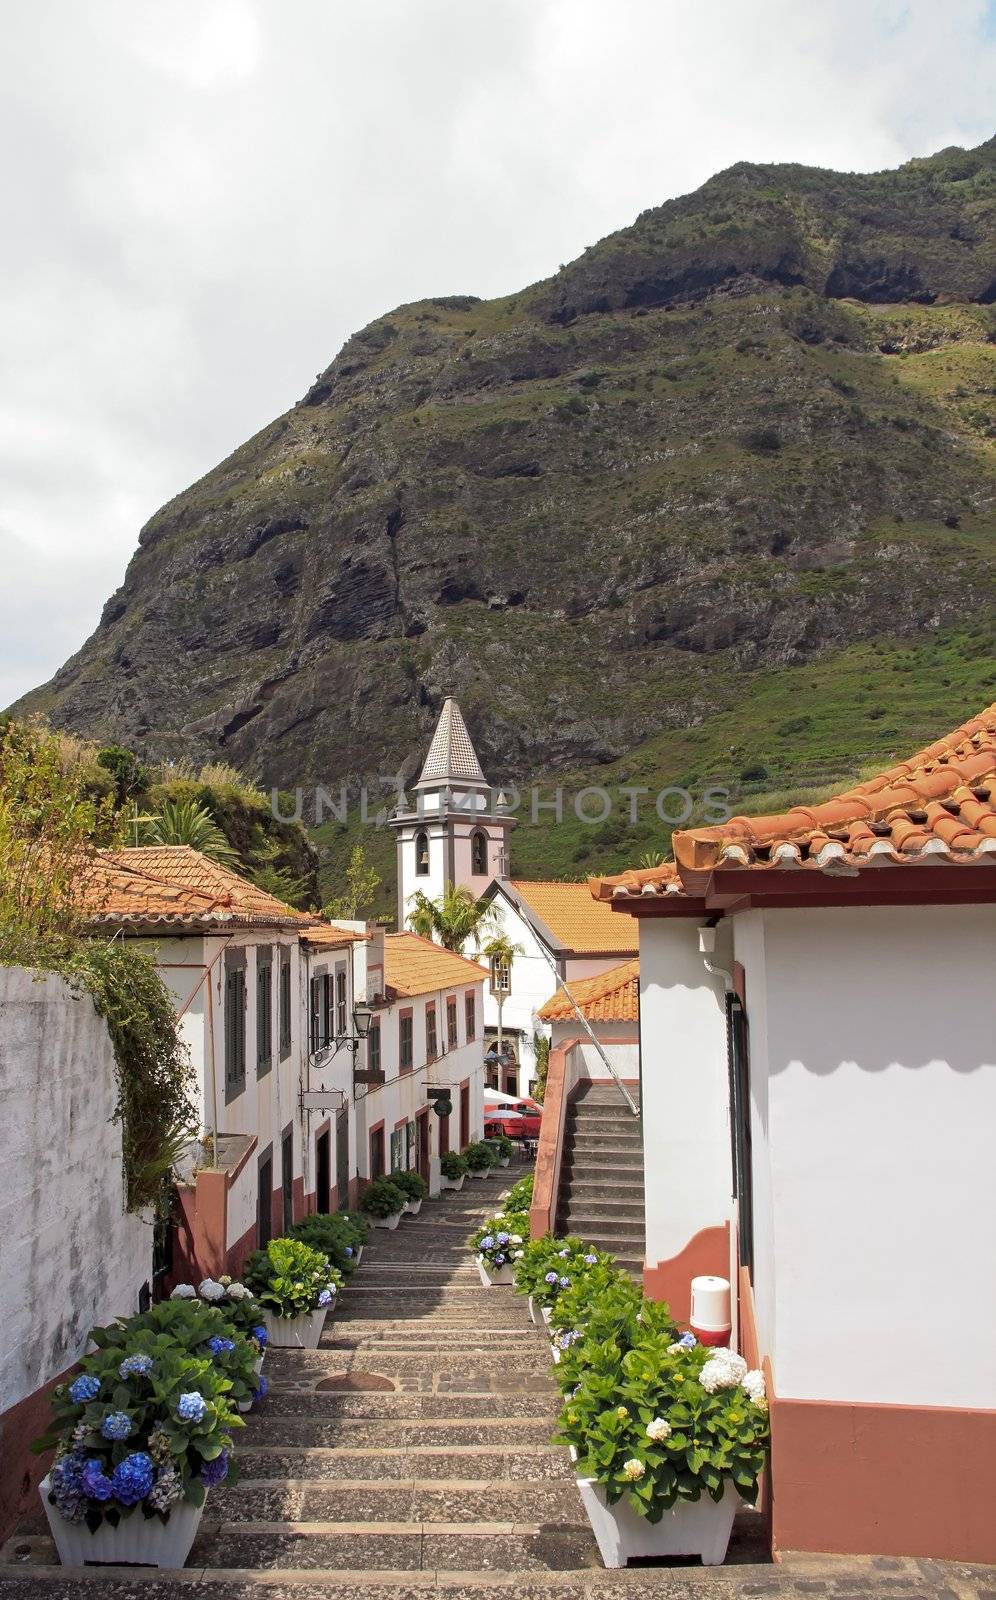 Village of Sao Vicente, church at the bottom of staircases (Madeira) by neko92vl